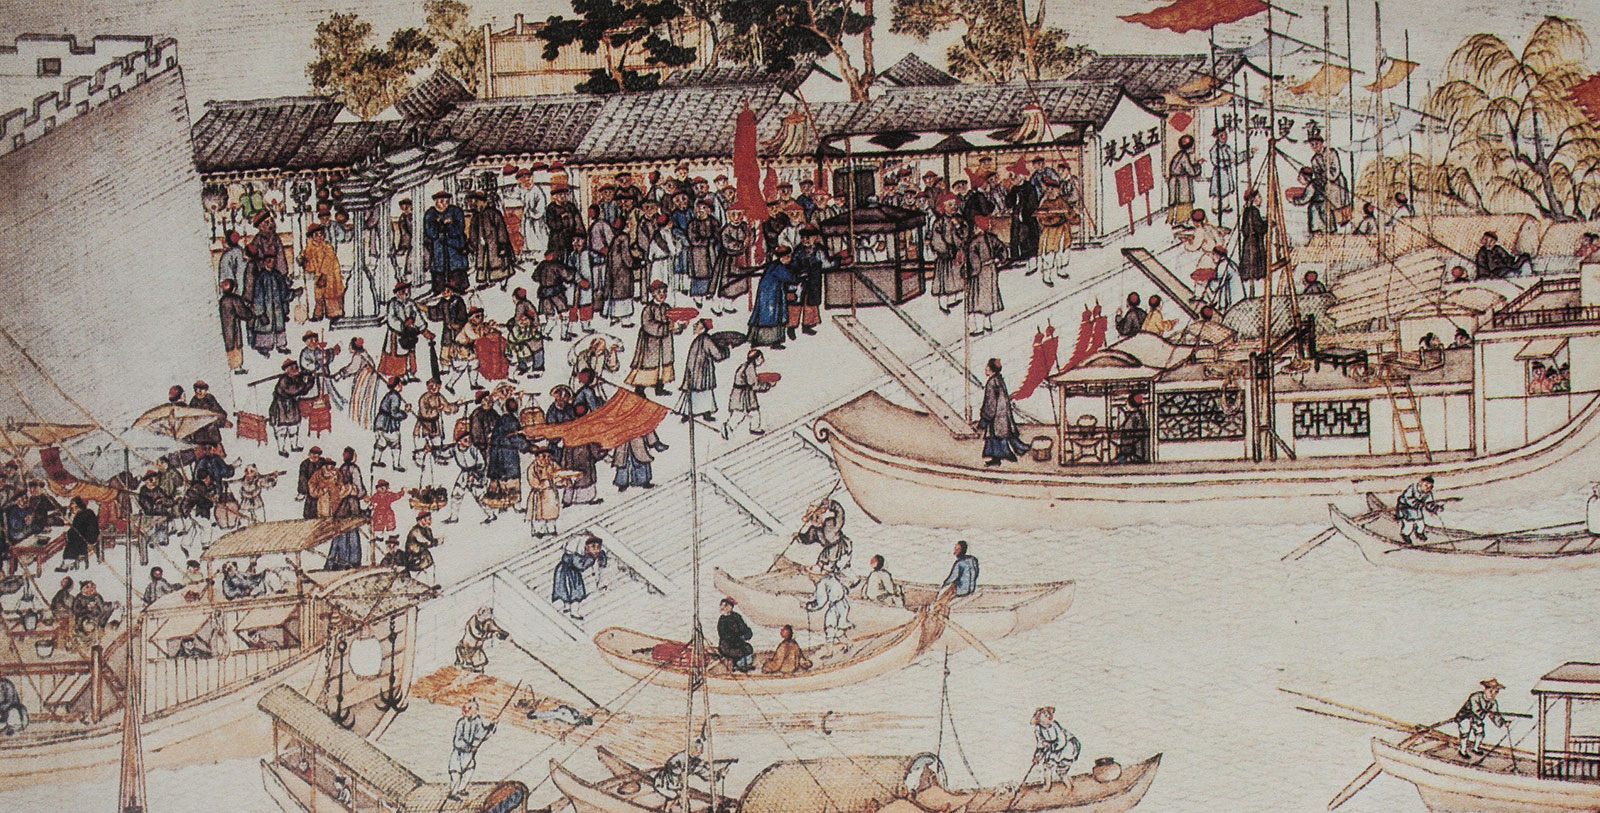 Image of historical scroll detailing Suzhou’s commercial center, Garden Hotel Suzhou, 1930s, a Member of Historic Hotels Worldwide in Suzhou, China